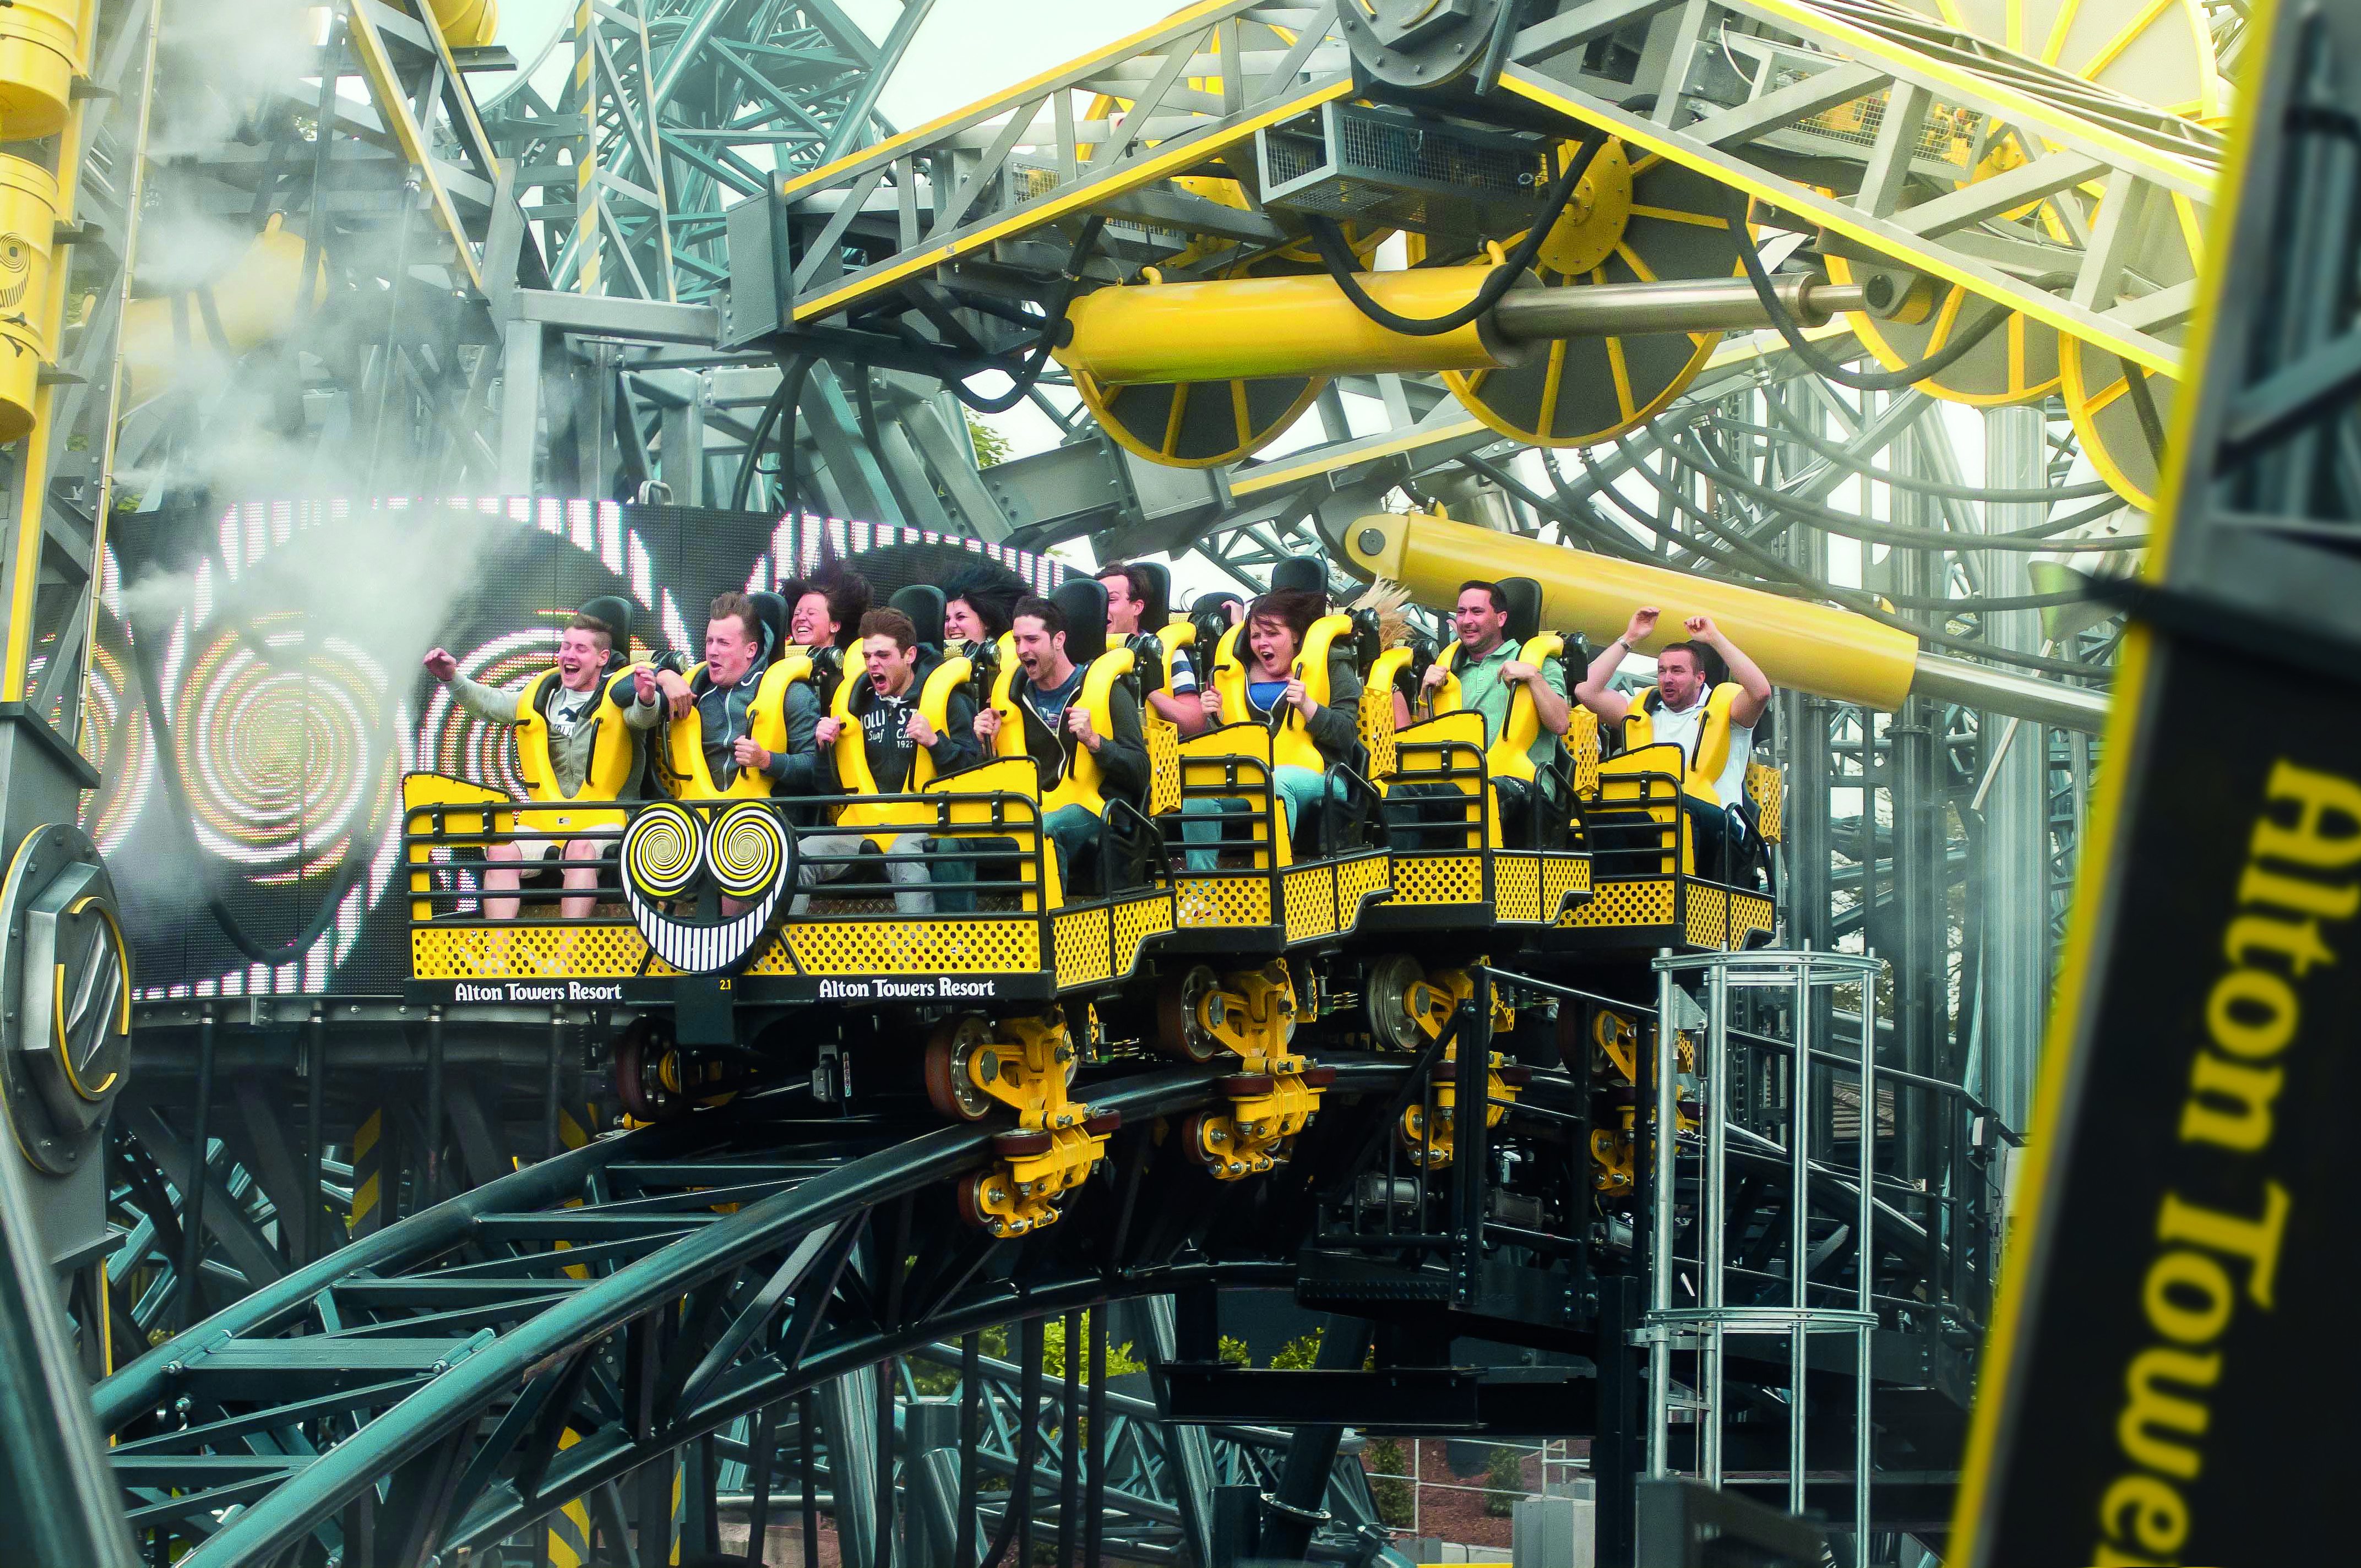 Guests on The Smiler at Alton Towers